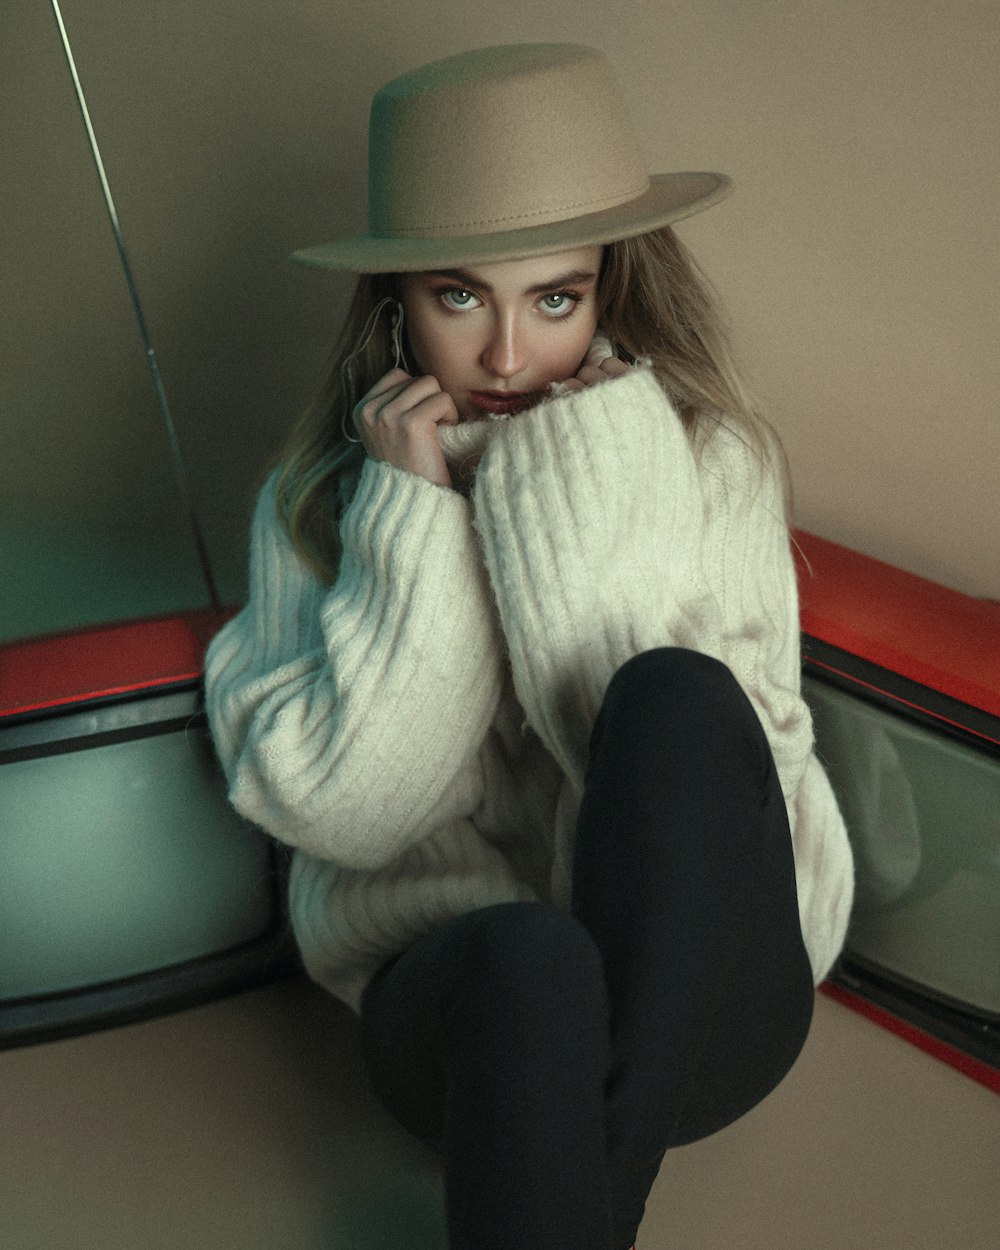 a woman in a white sweater and hat sitting on a red car